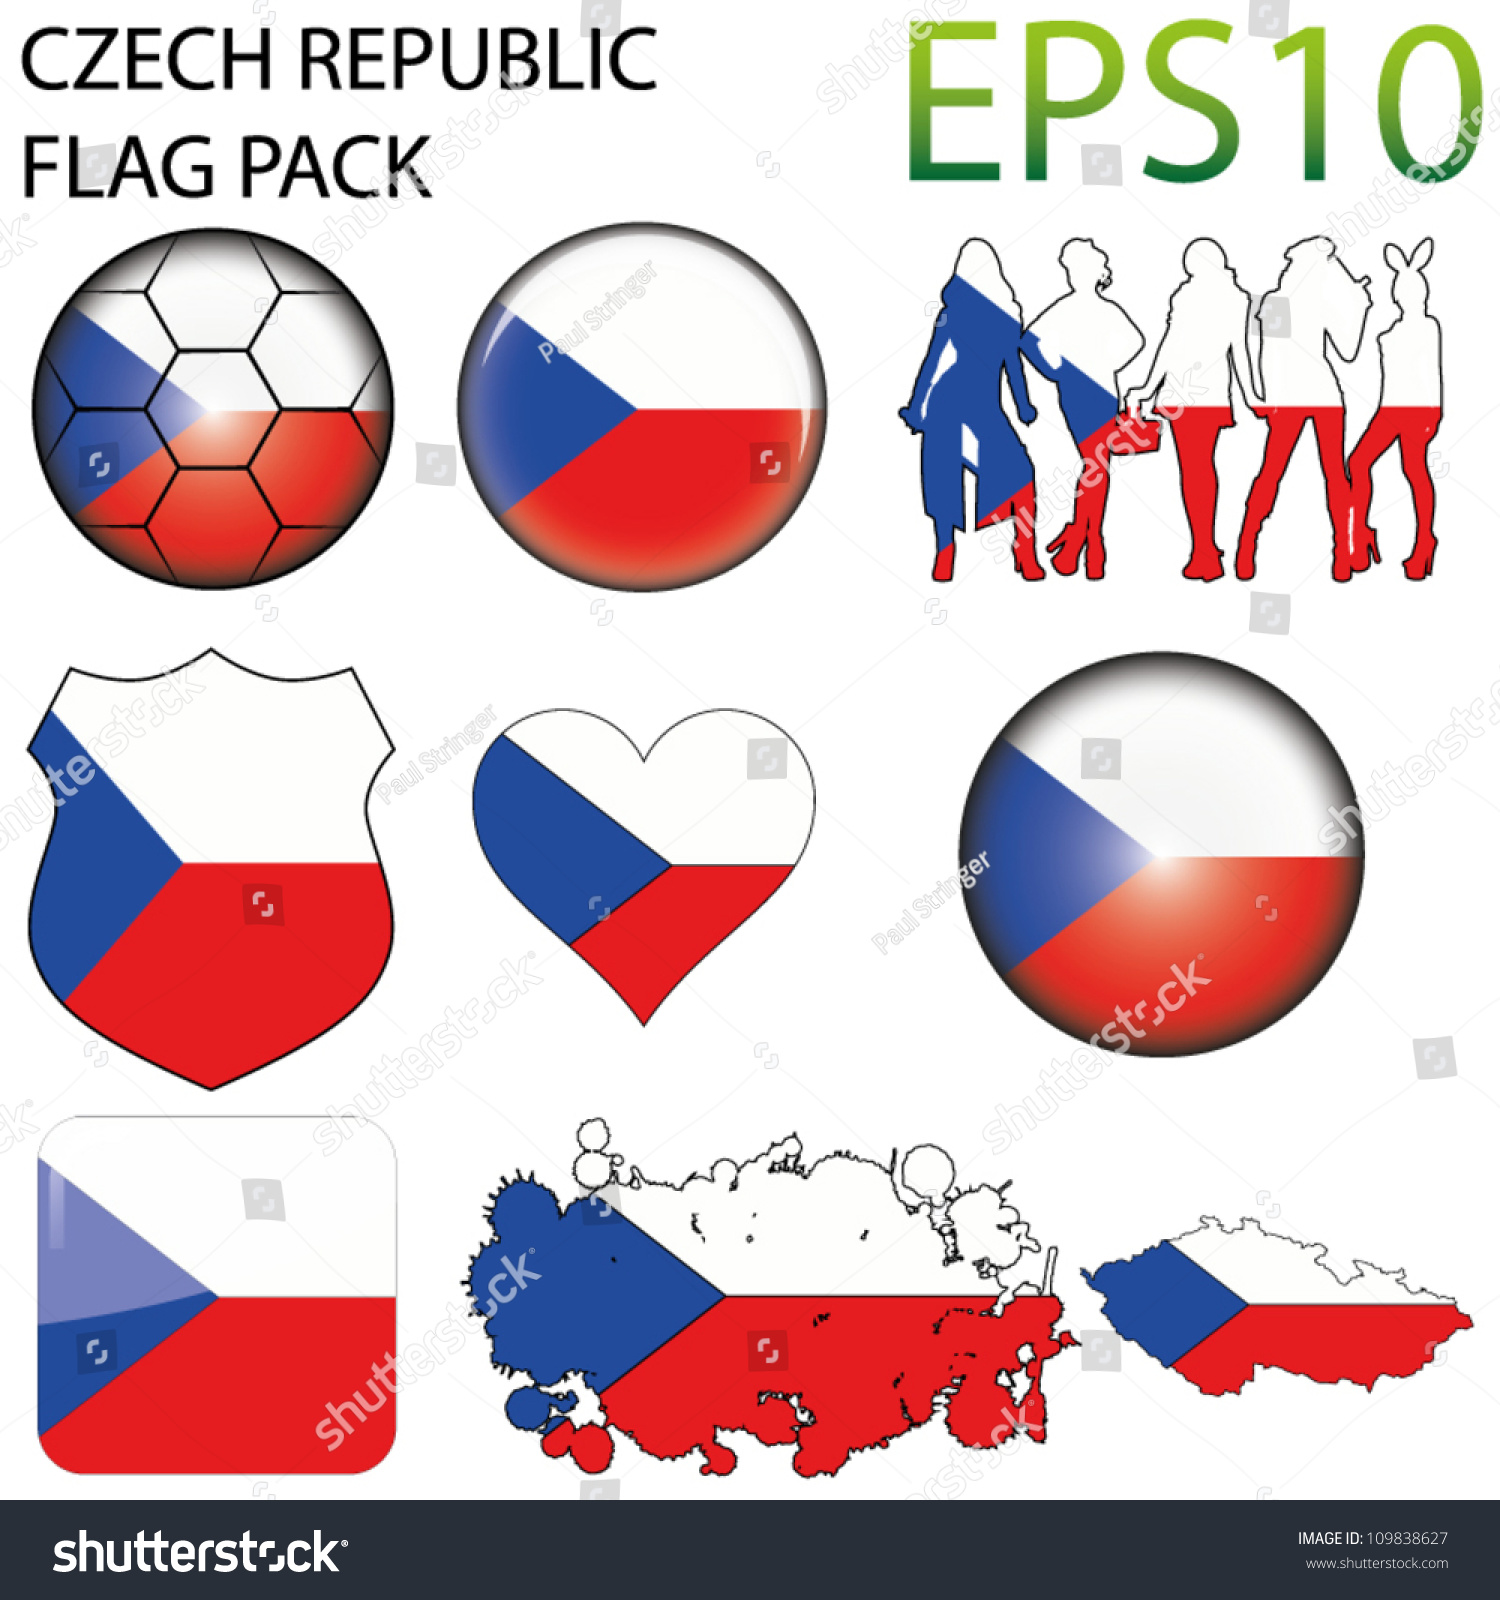 Attractive czech republic flag coloring page